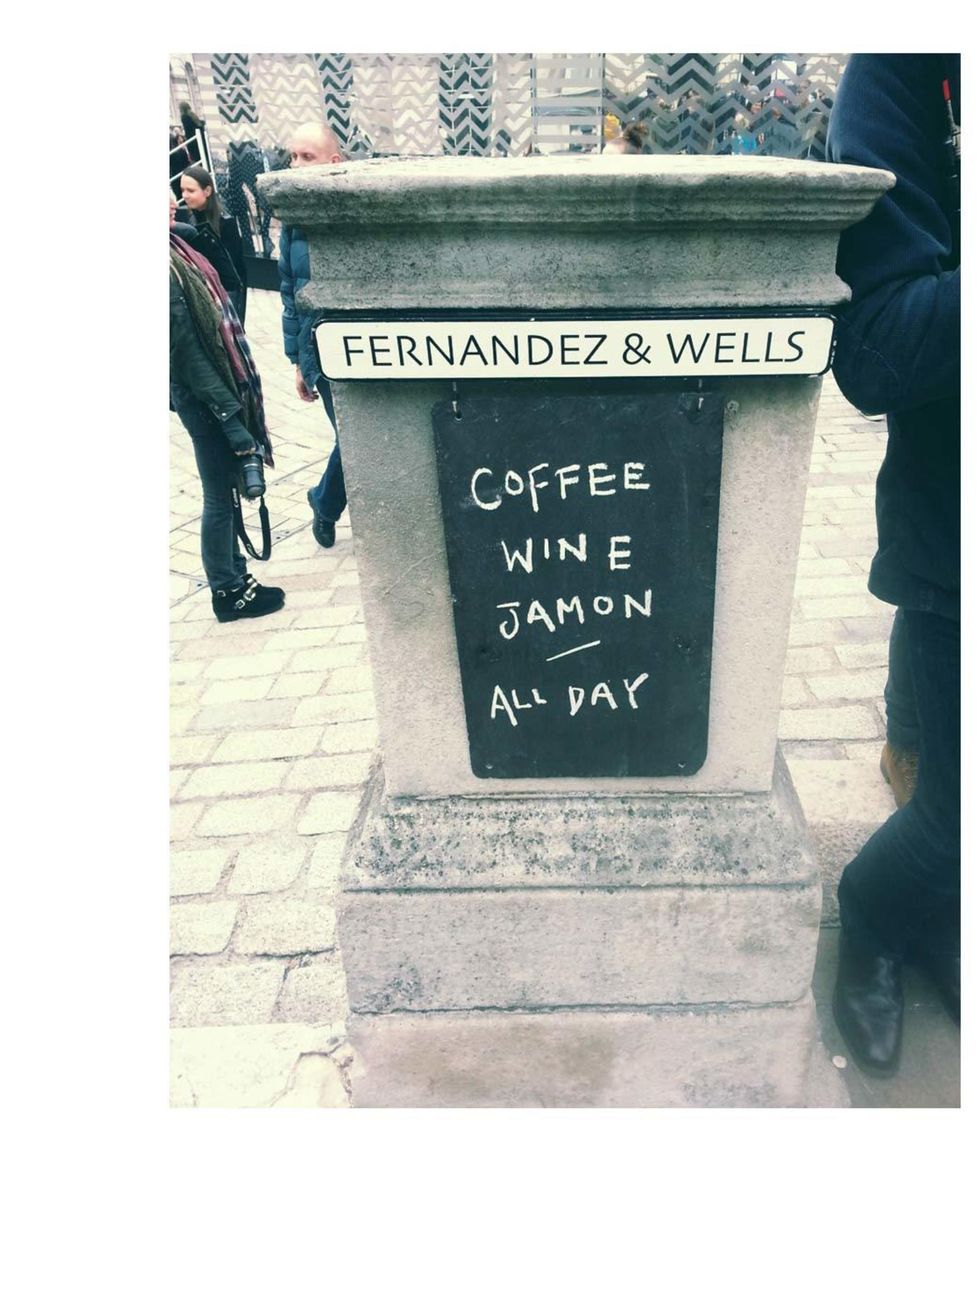 <p>And back this morning at Somerset House for Simone Rocha.</p><p>I quite liked the Fernandez &amp; wells sign. The first thought I had  was that all together this is the perfect breakfast cocktail to get me through fashion week.</p>